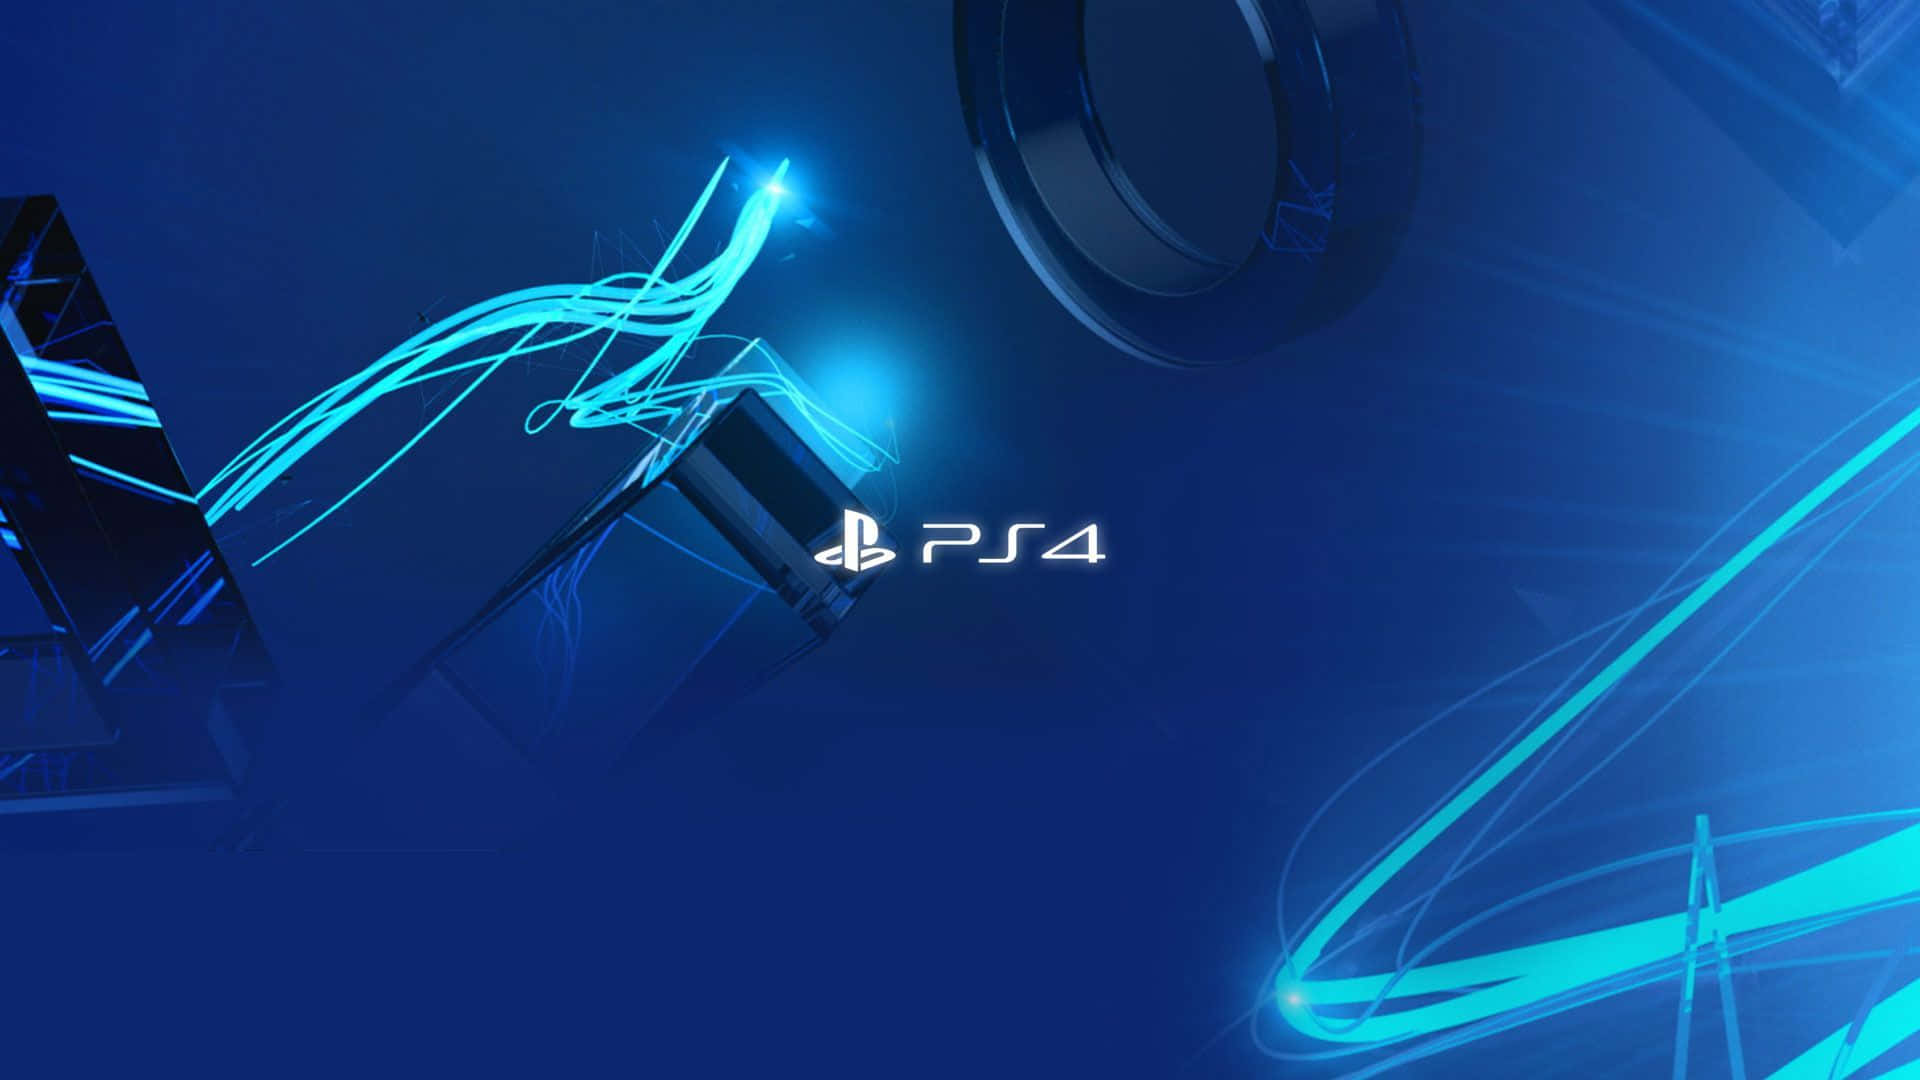 Dive into new adventures on your PS4! Wallpaper